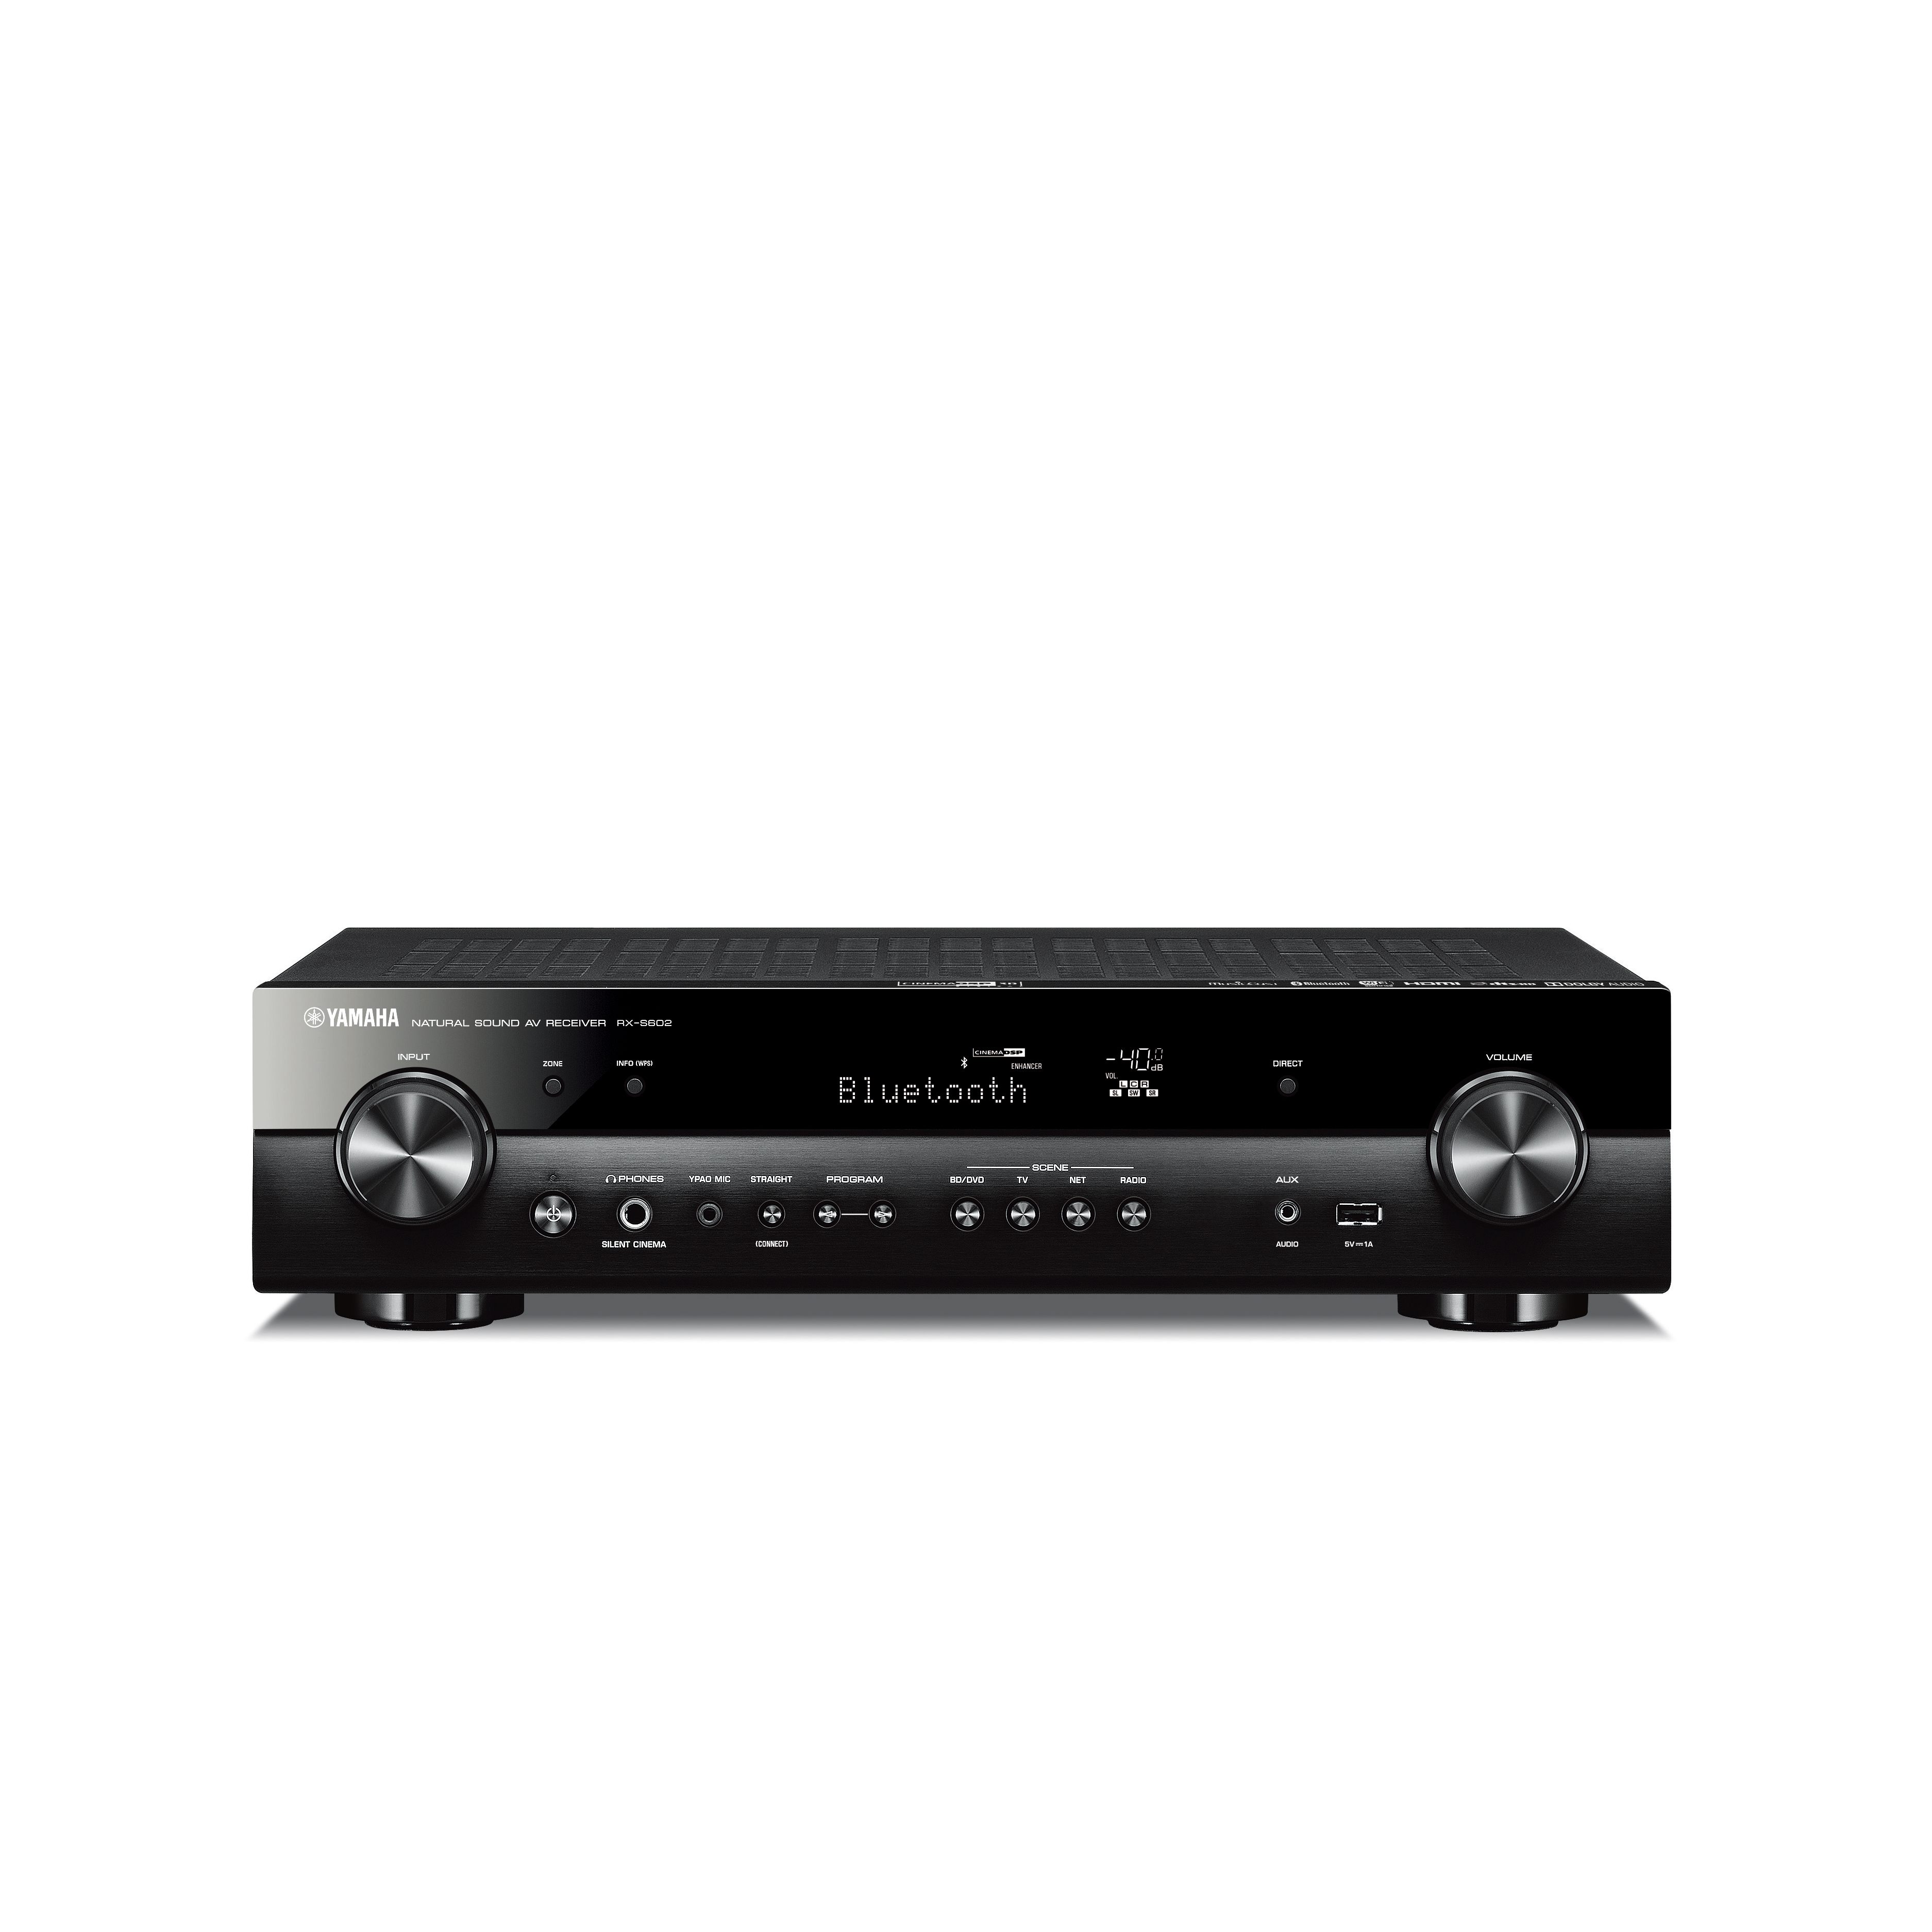 RX-S602 - Overview - AV Receivers - Audio & Visual - Products 